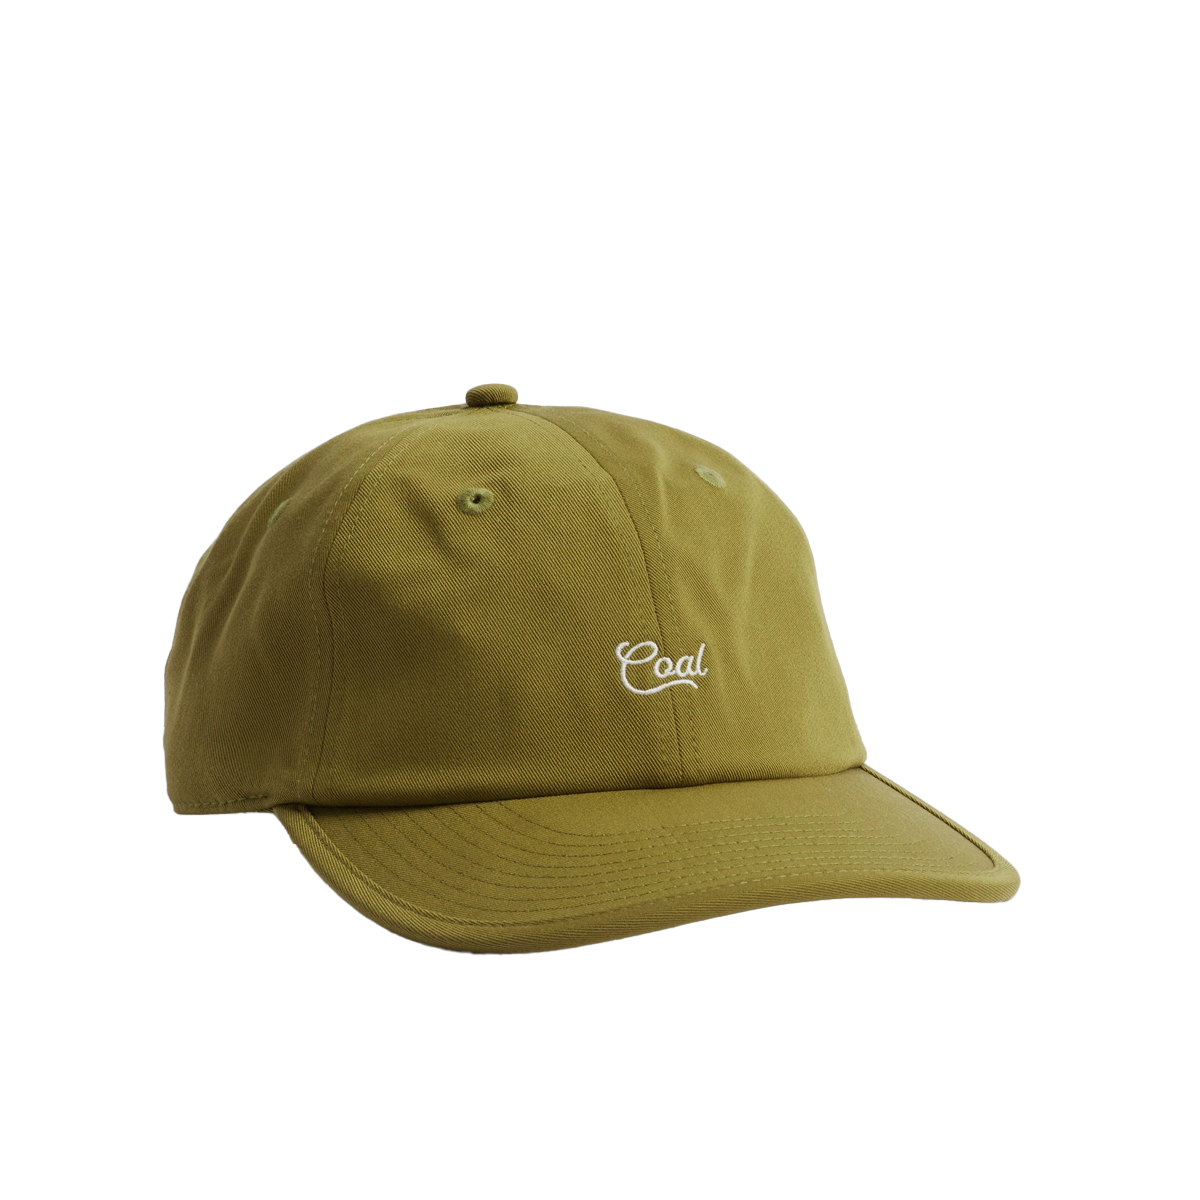 Coal The Pines Ultra Low Unstructured Hat - Assorted Colors